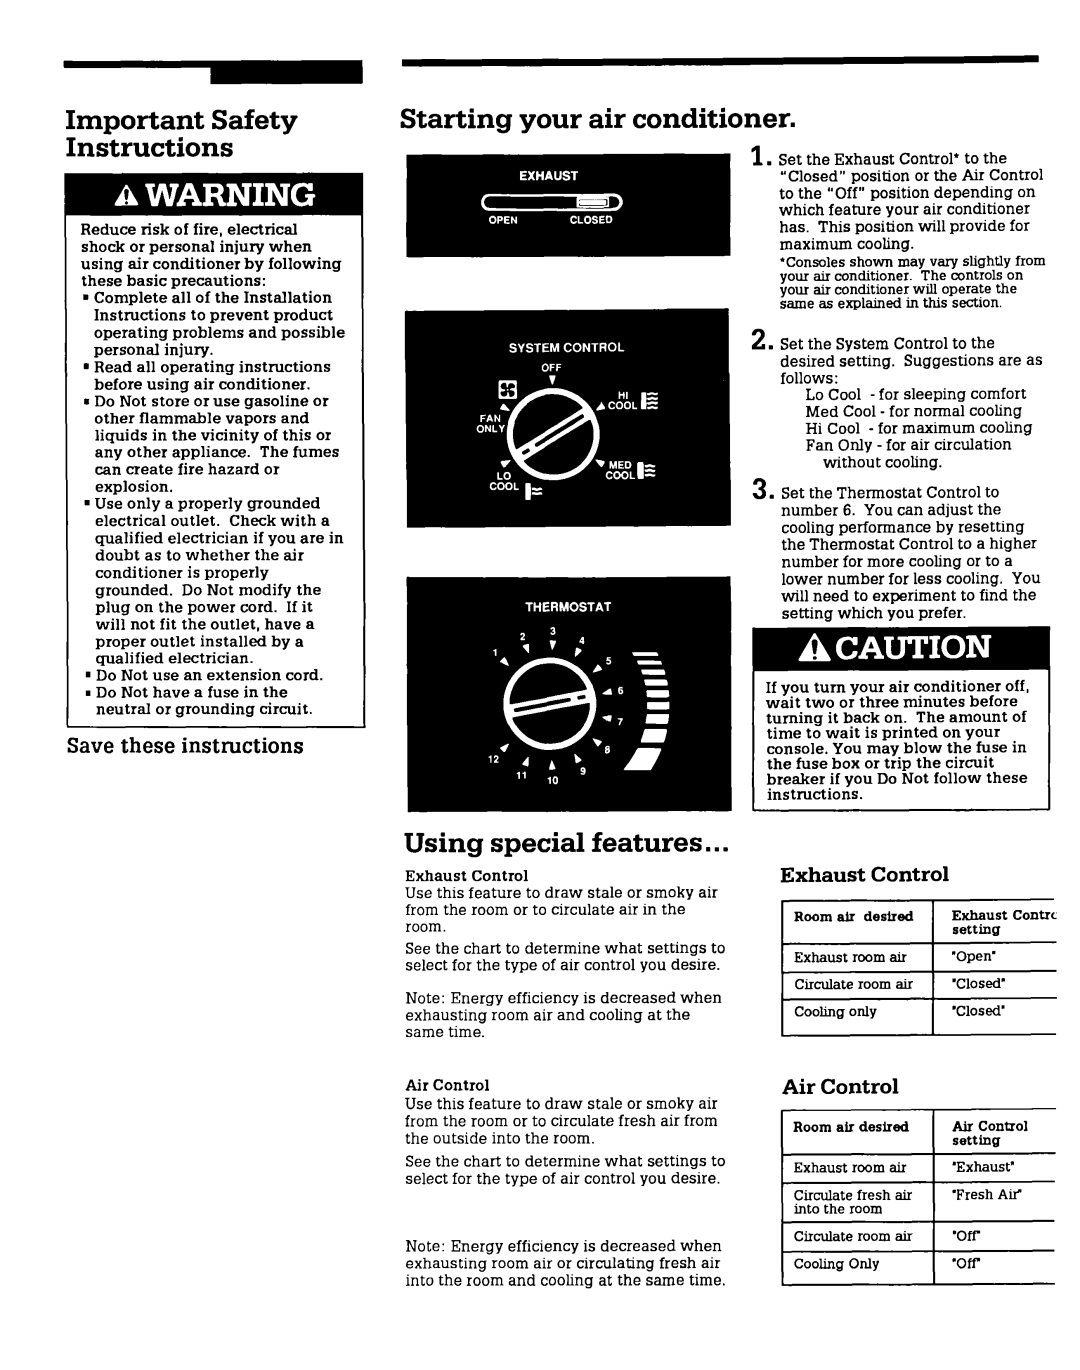 Whirlpool X12002V0 Important Safety Instructions, Starting your air conditioner, Using special features, Control, Exhaust 